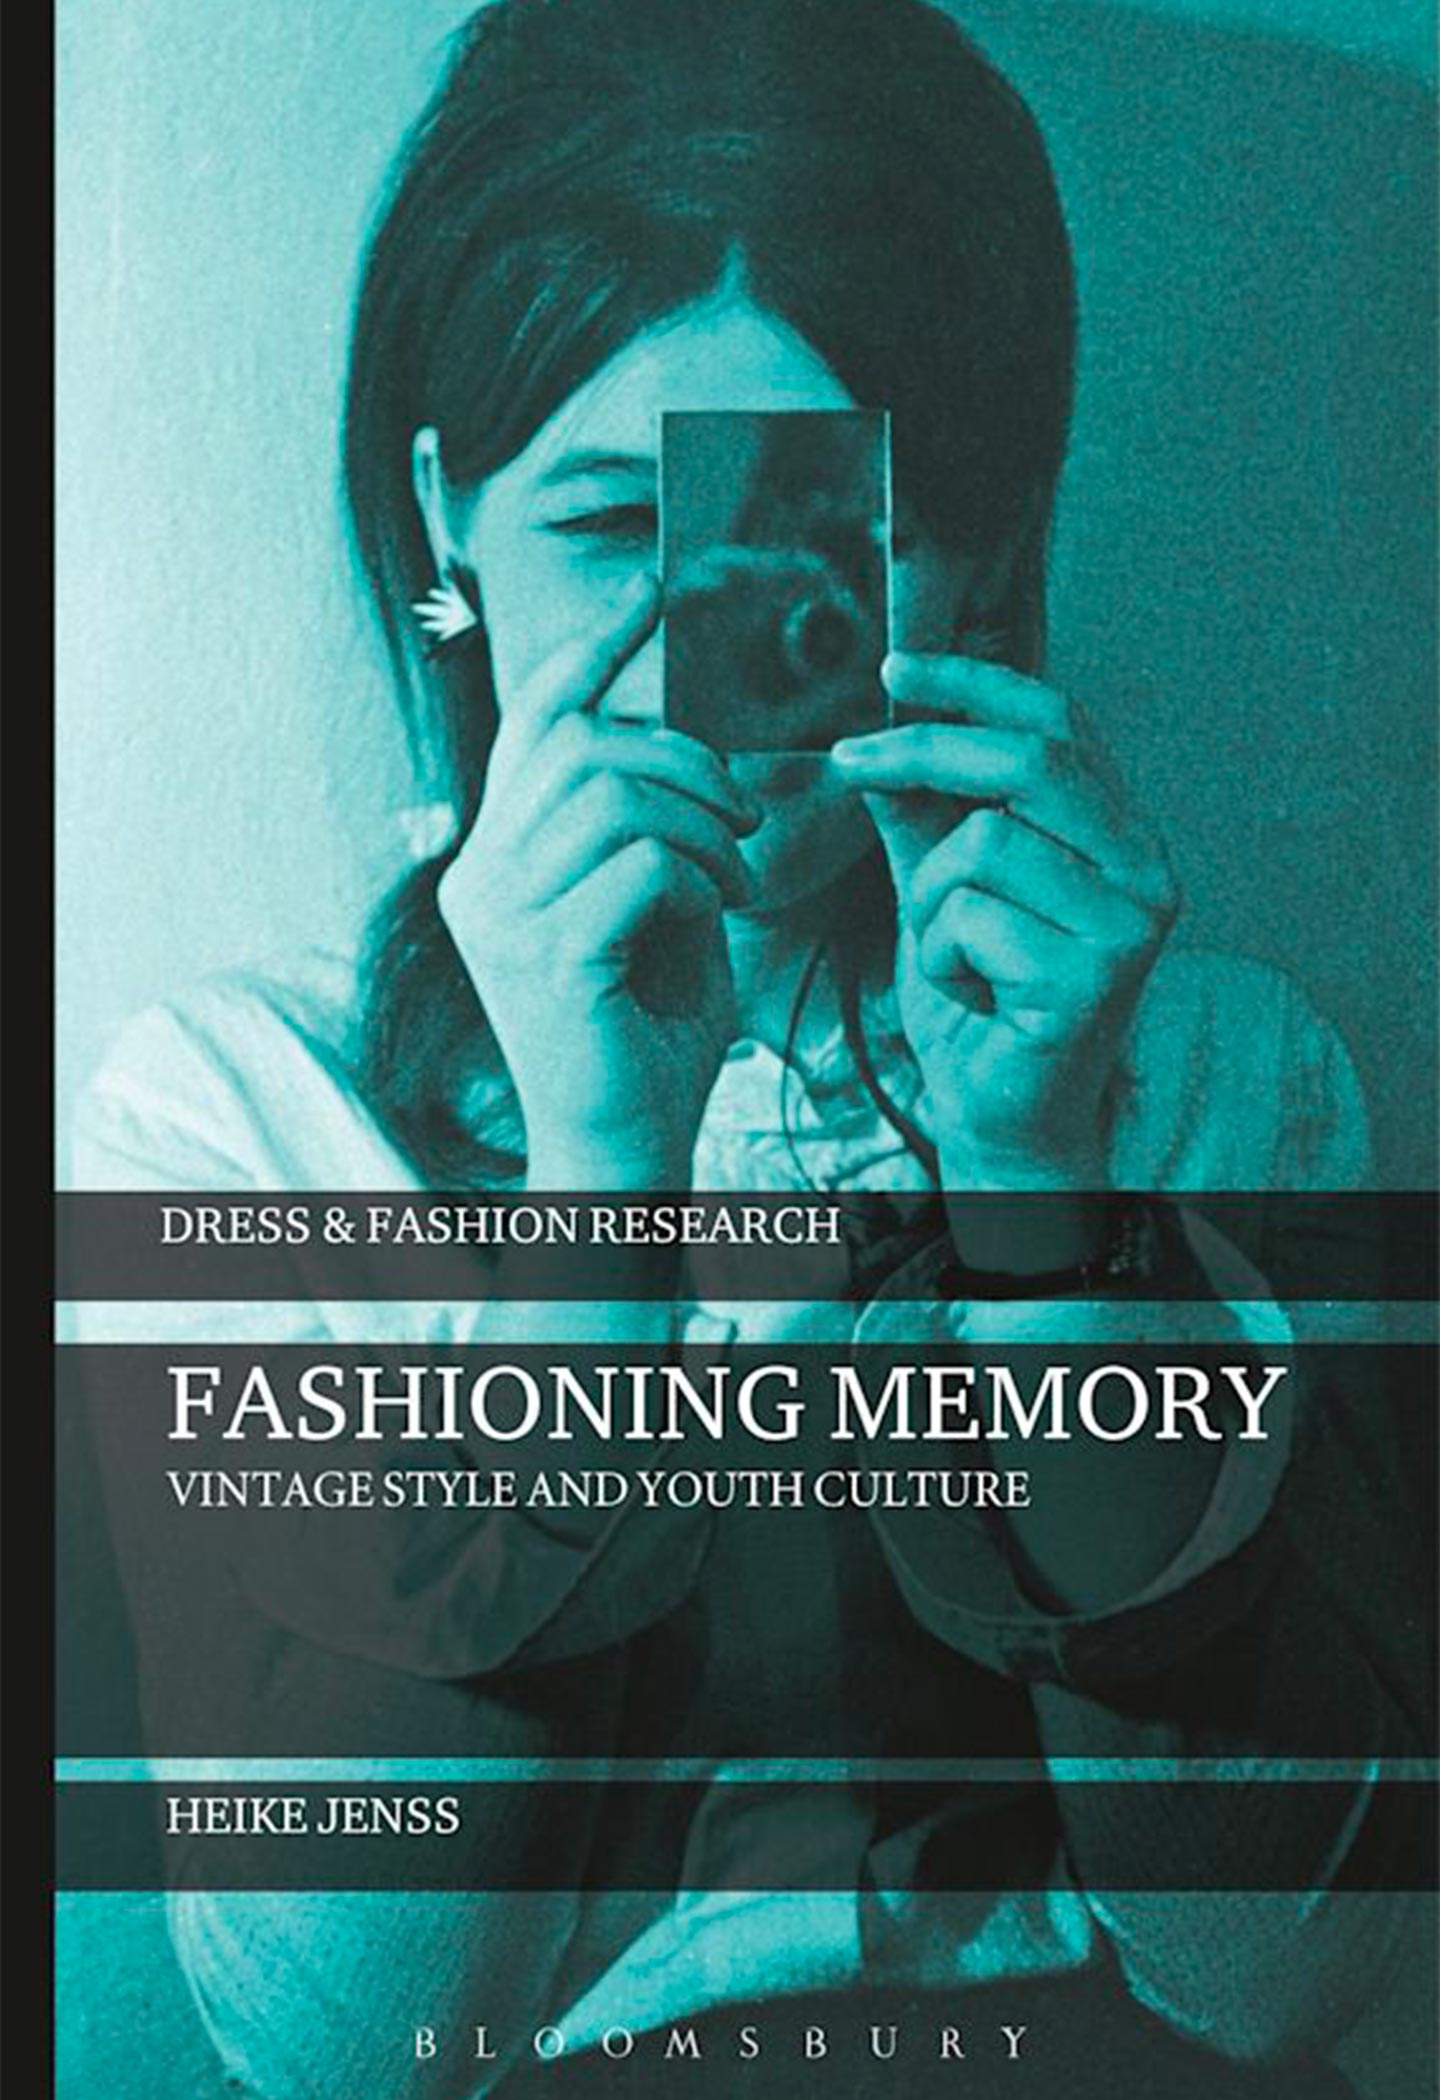 Jenss, H. (2015) Fashioning Memory: Vintage Style and Youth Culture. London: Bloomsbury Academic